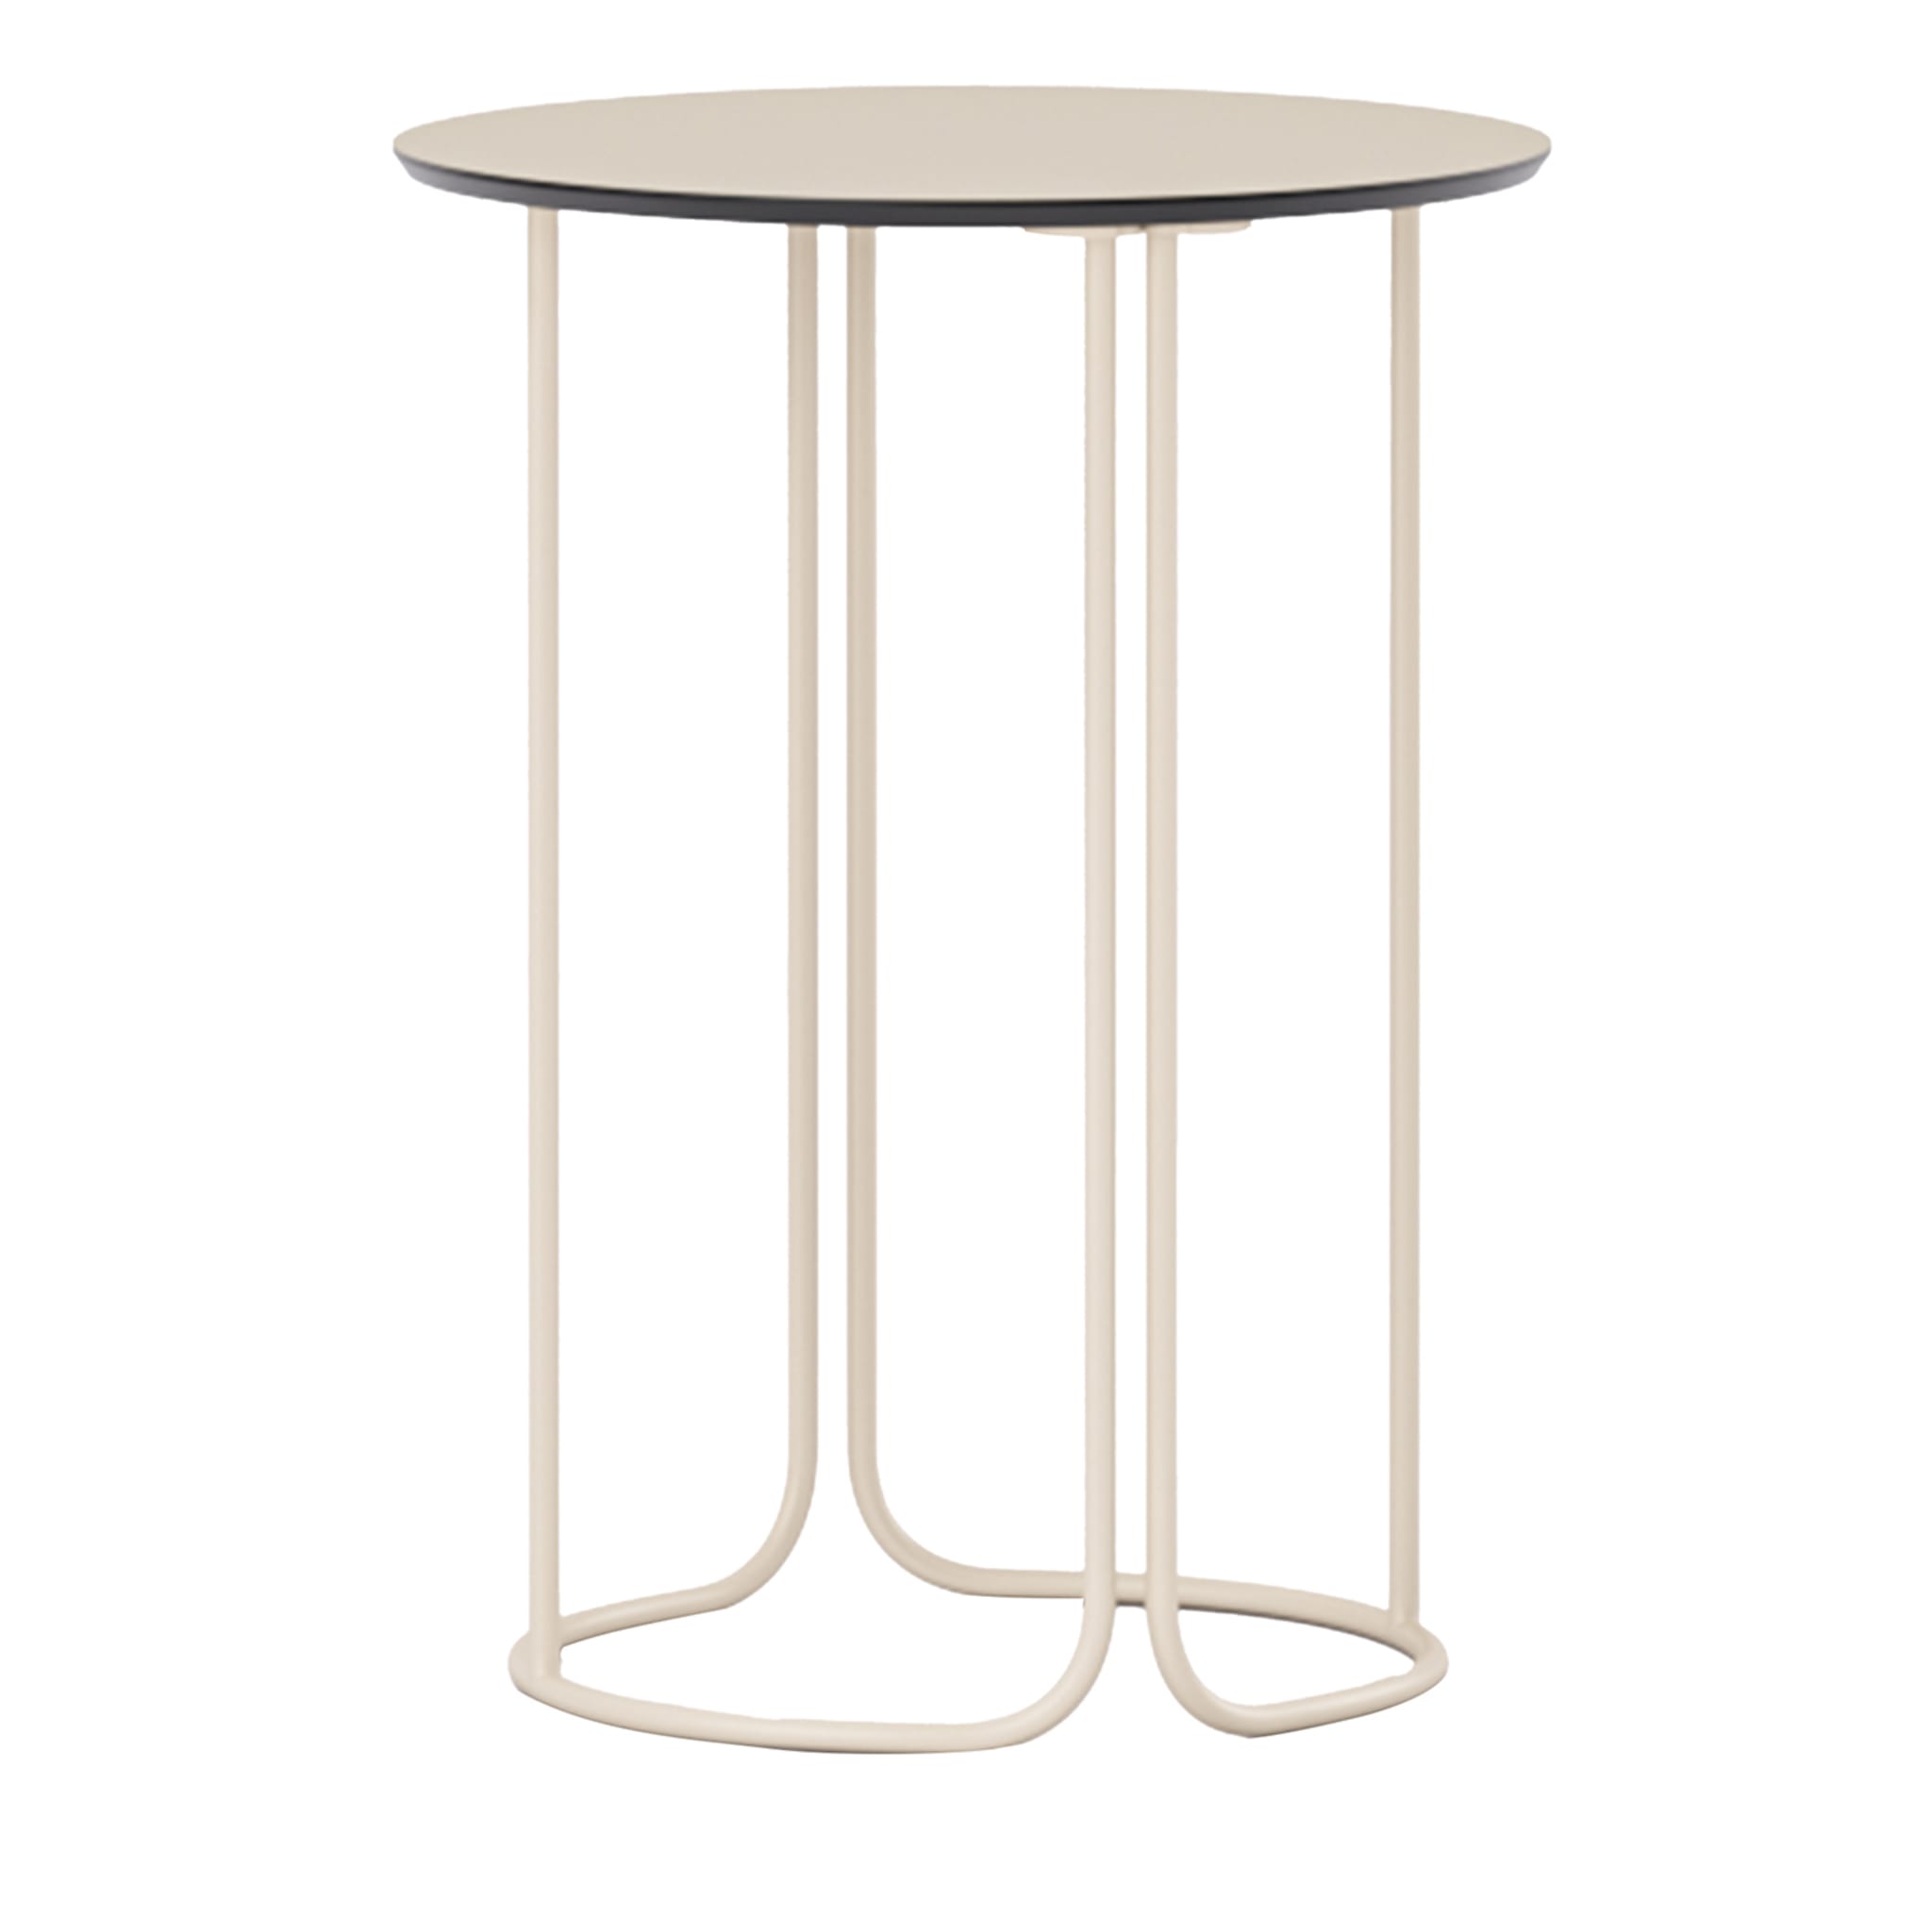 Scala Round Beige Side Table by Marco Piva - Main view